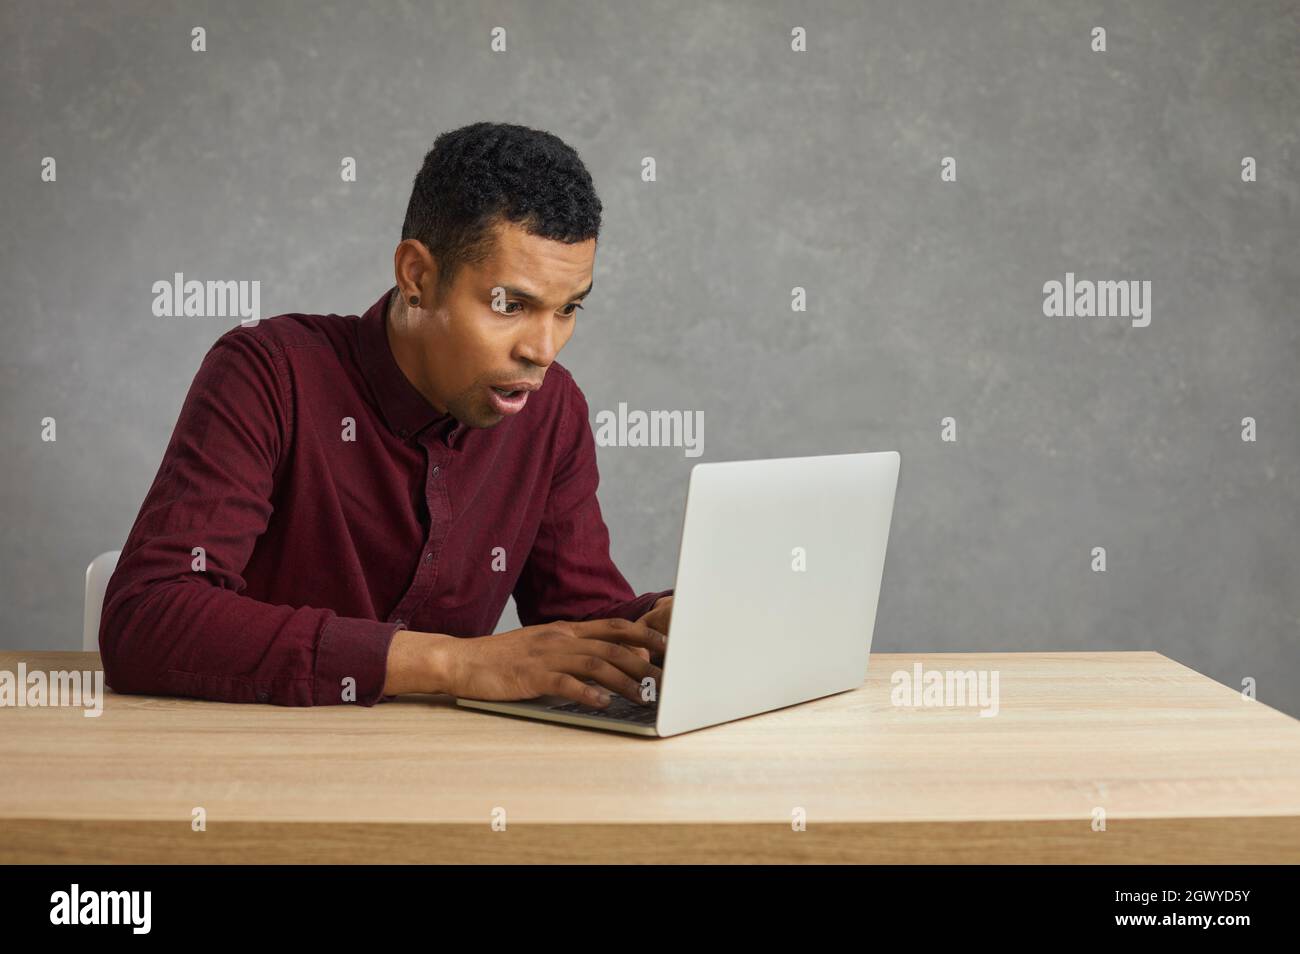 Young African American man in trouble due to computer error or software problem on laptop Stock Photo